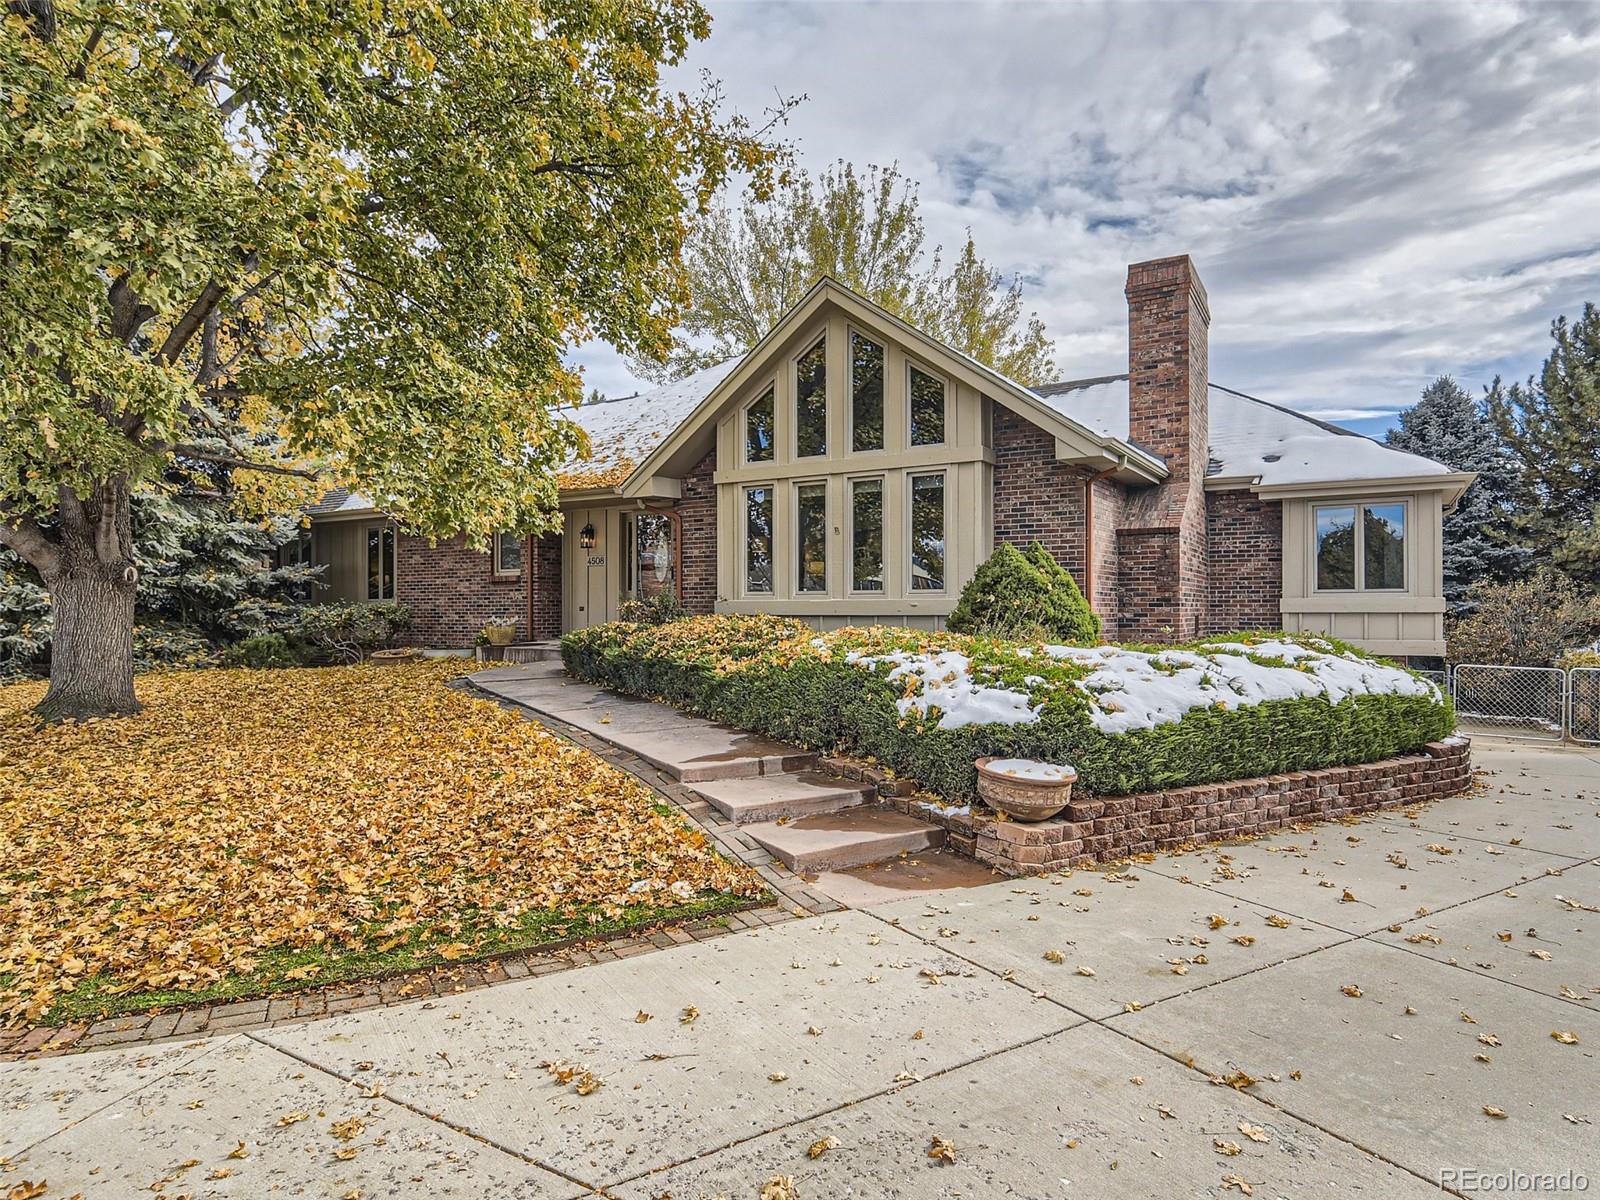 4508 w lake circle, Littleton sold home. Closed on 2024-02-26 for $998,870.